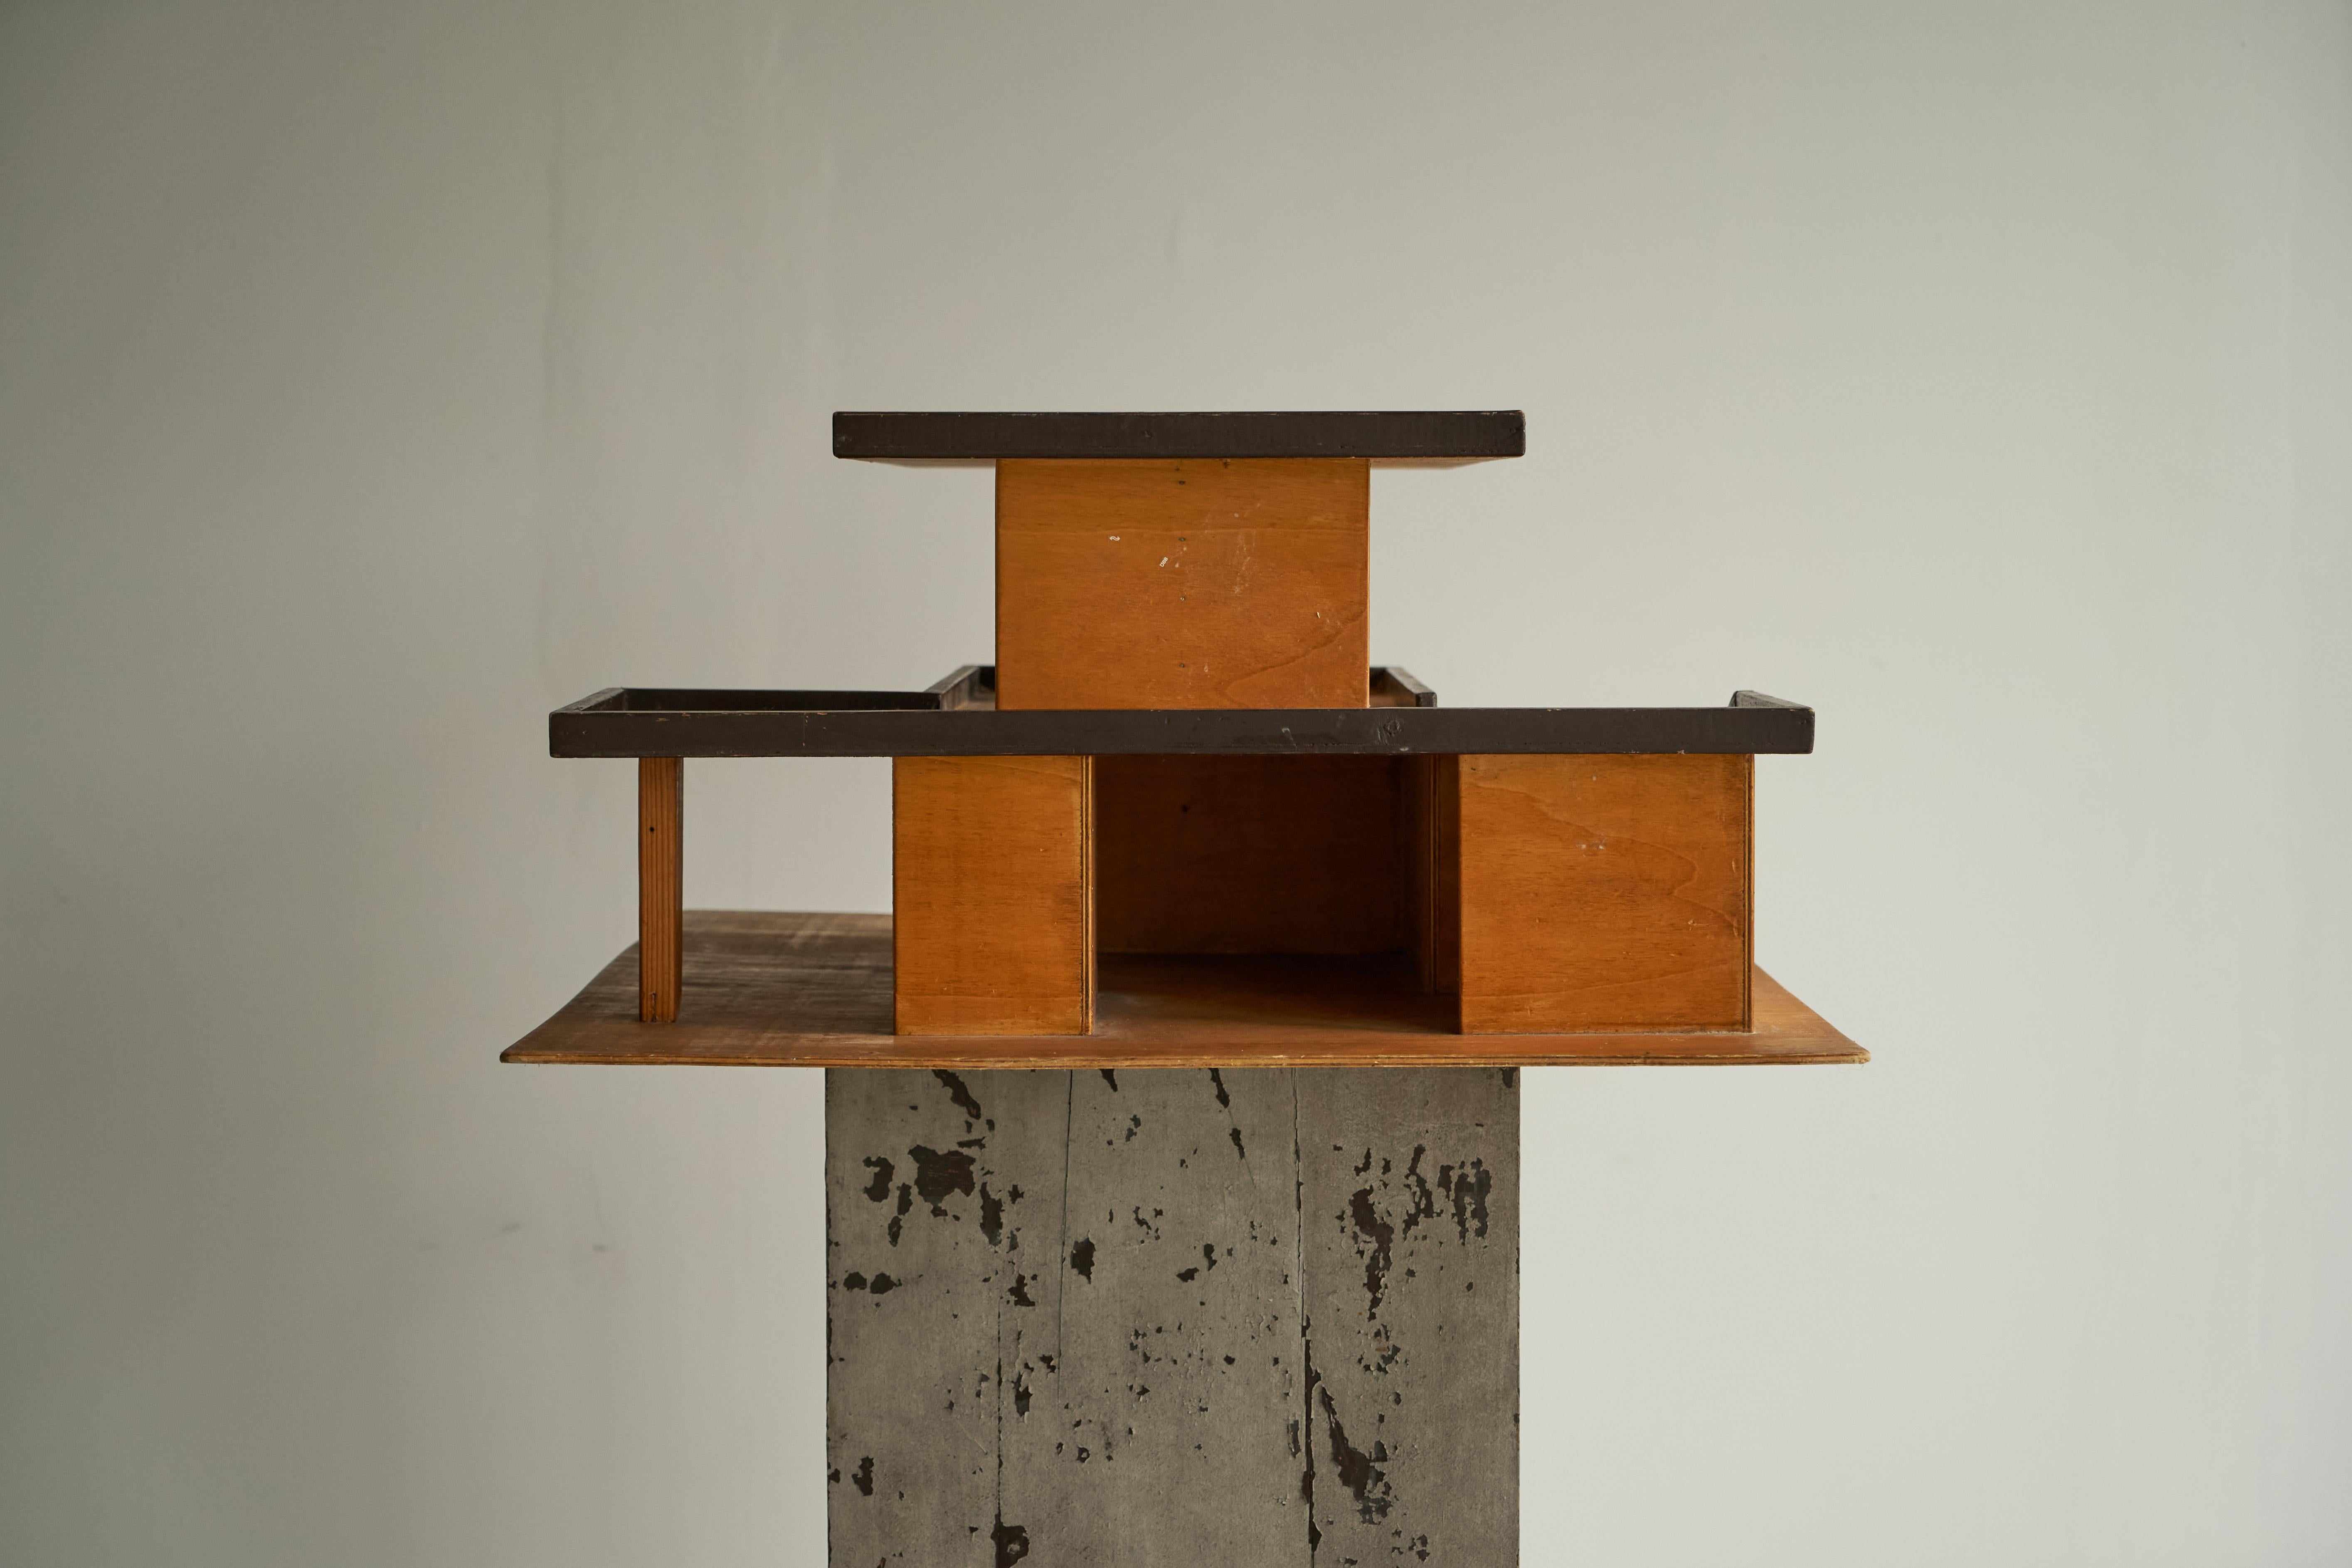 Wood Modernist Architectural Model in Stained Plywood 1950s For Sale